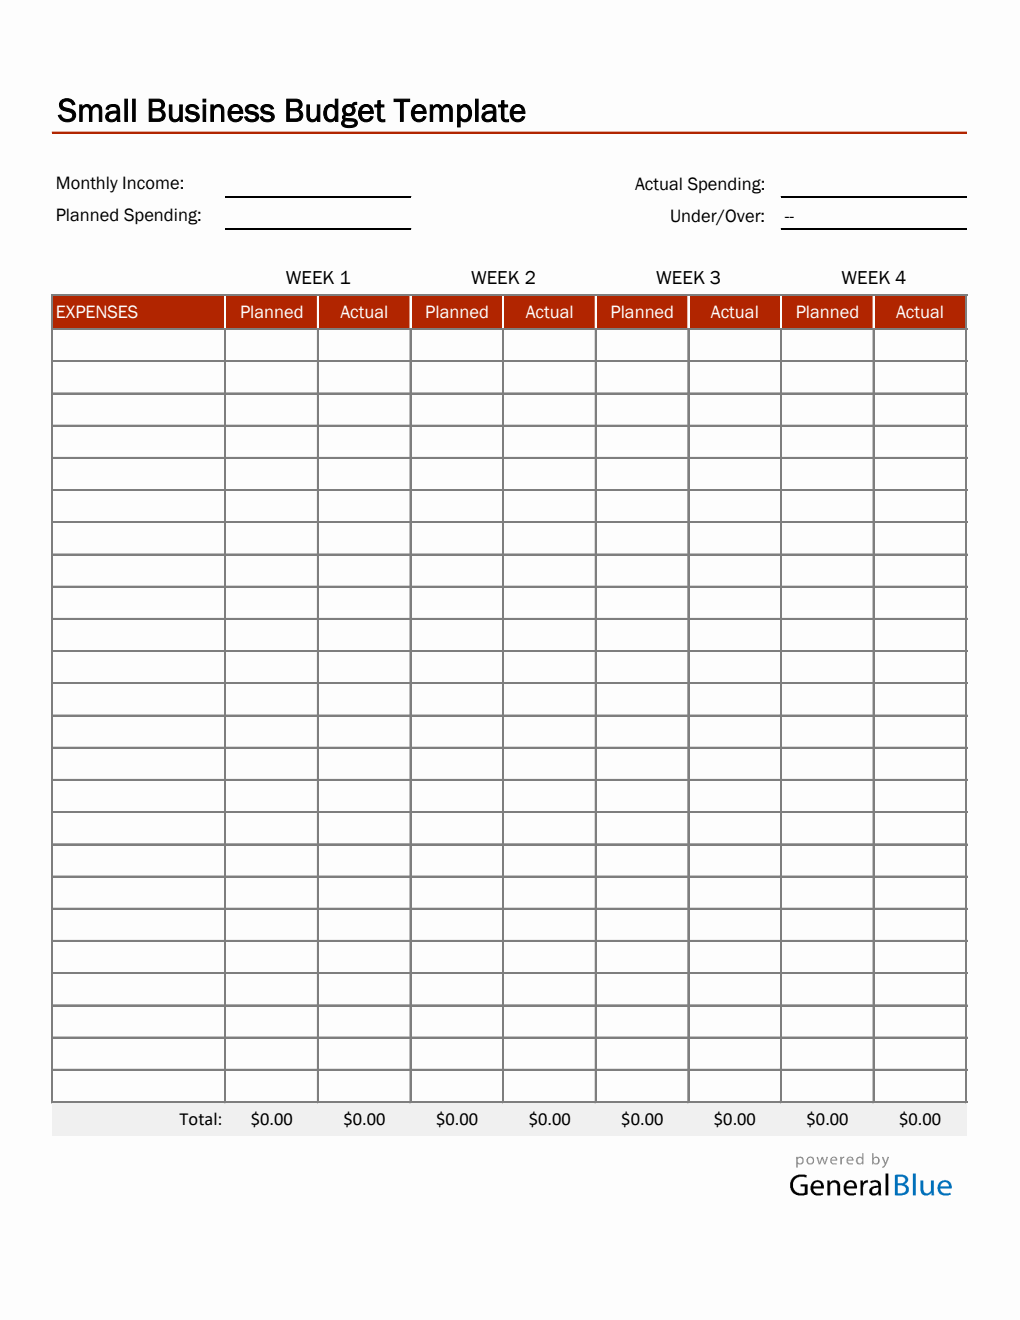 Small Business Budget Template in Excel (Red)